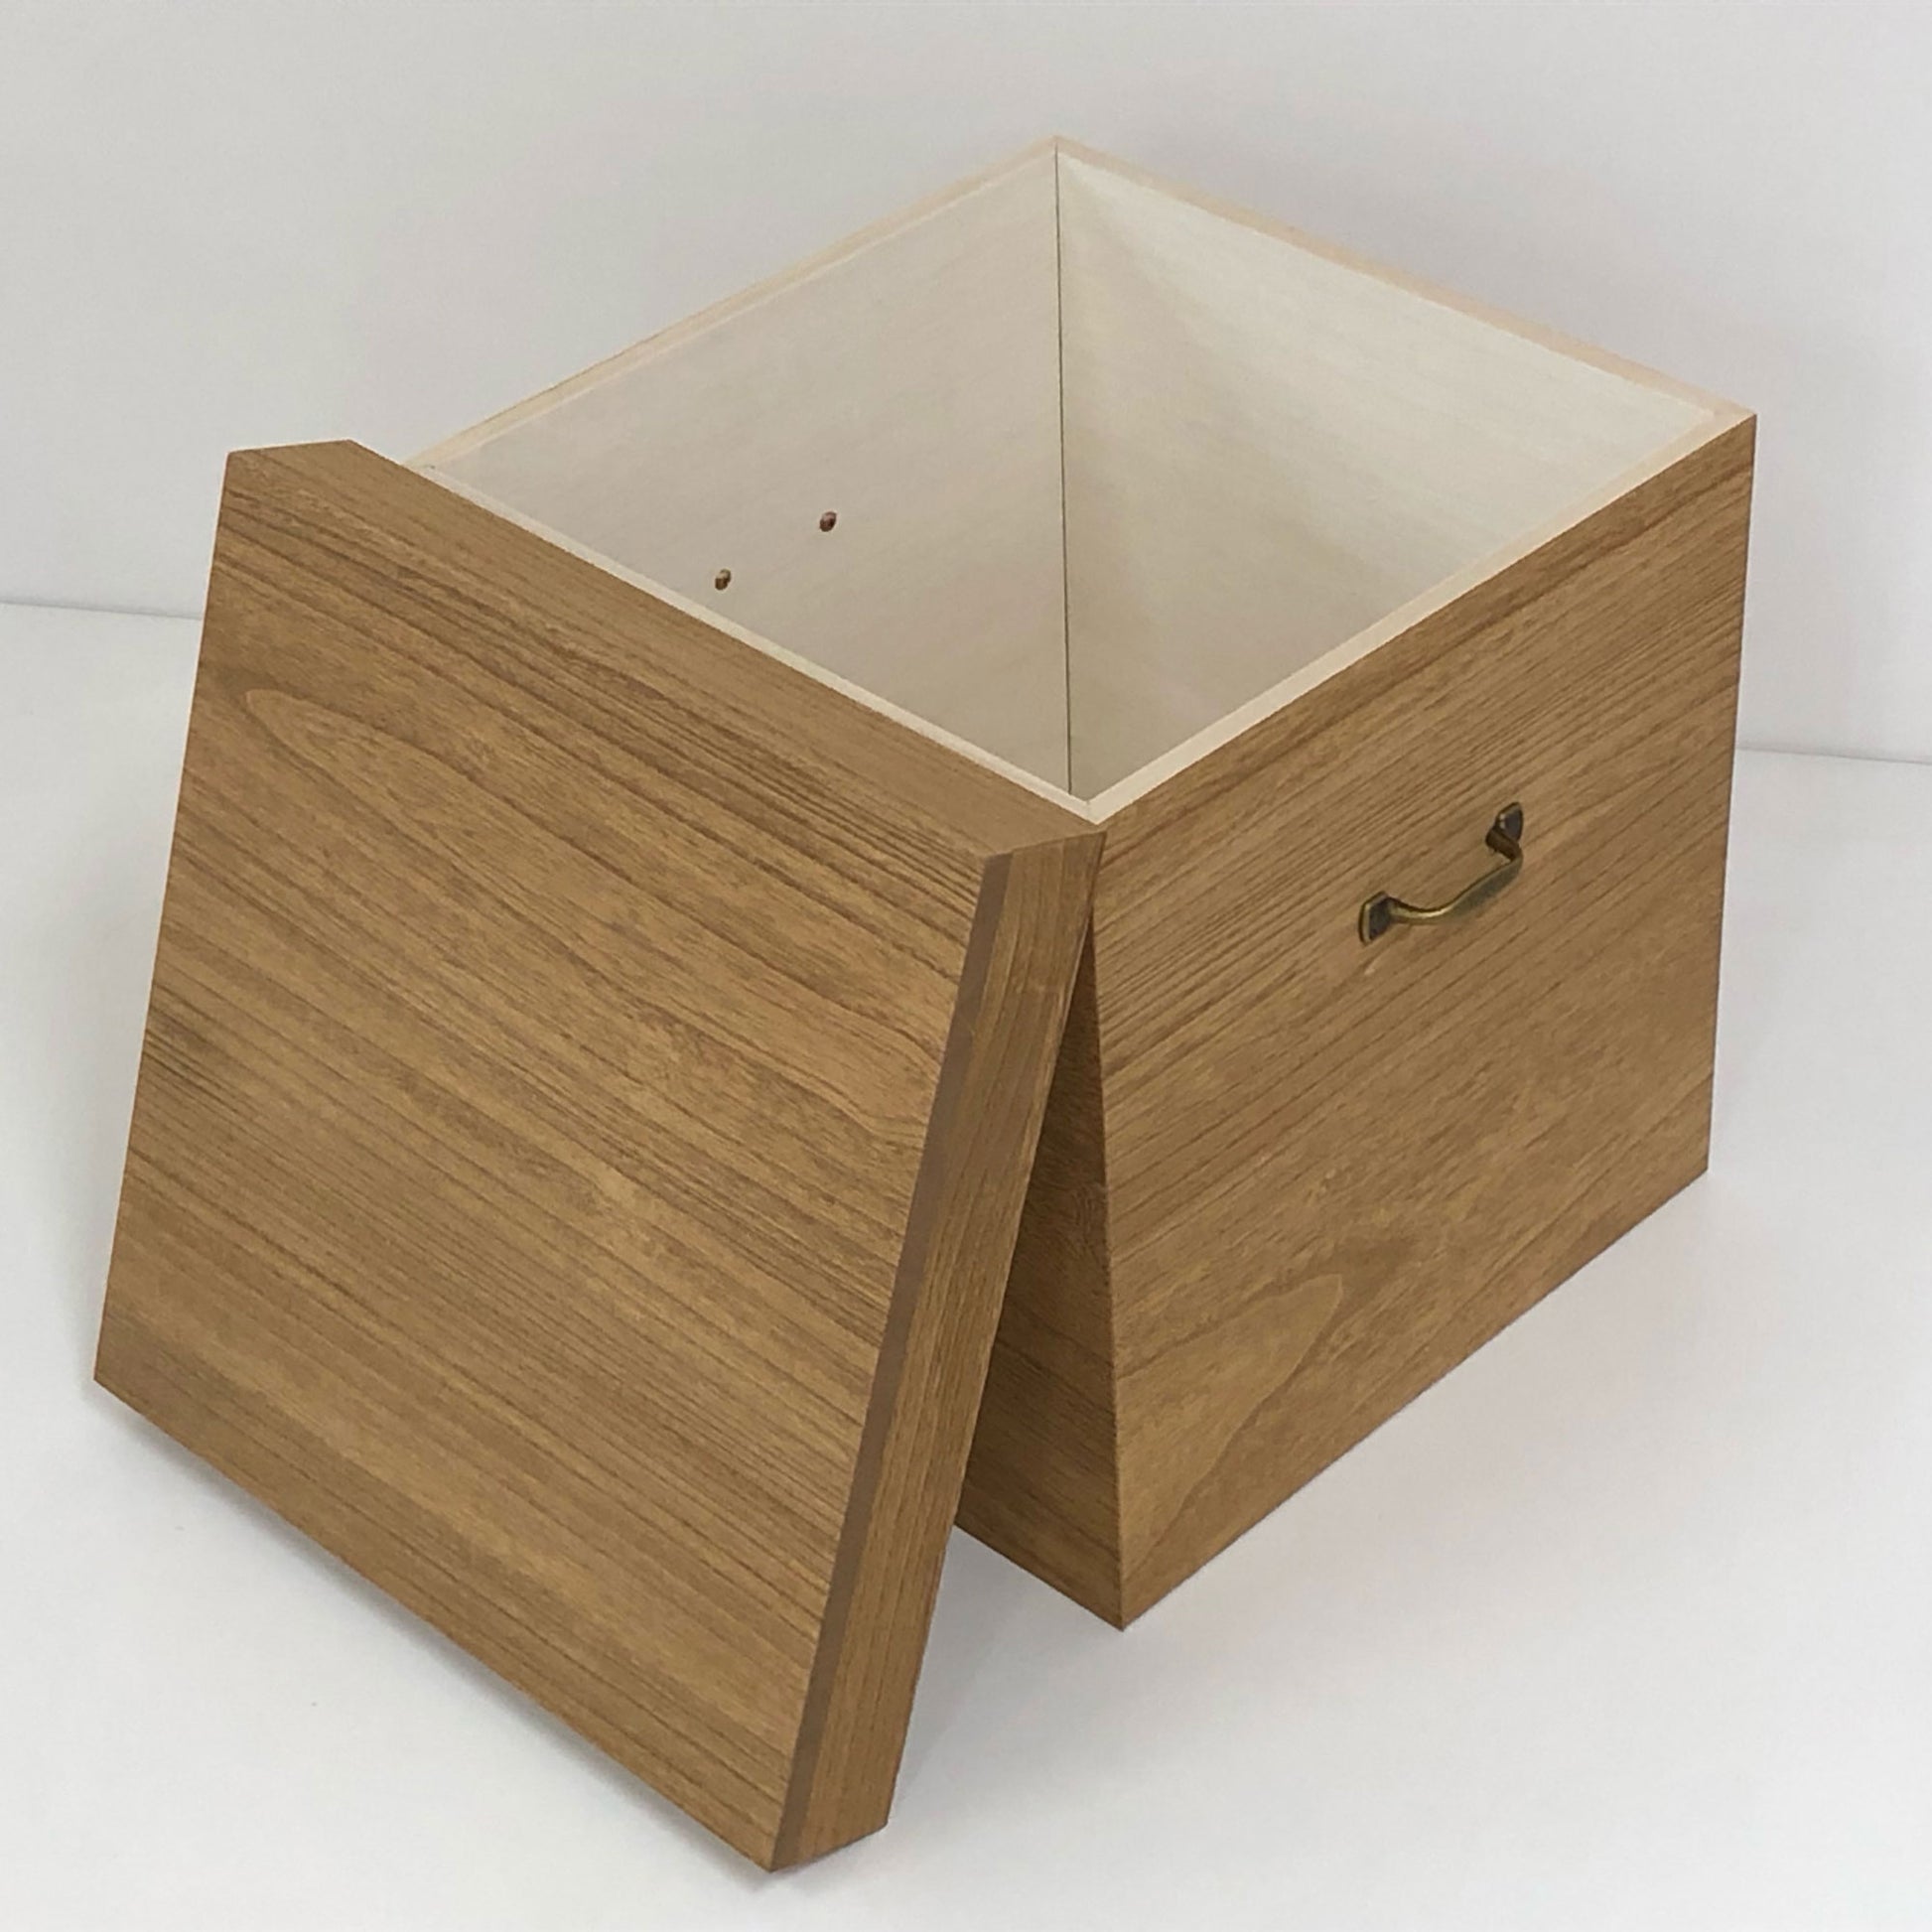 Excellent humidity control storage due to paulownia wood